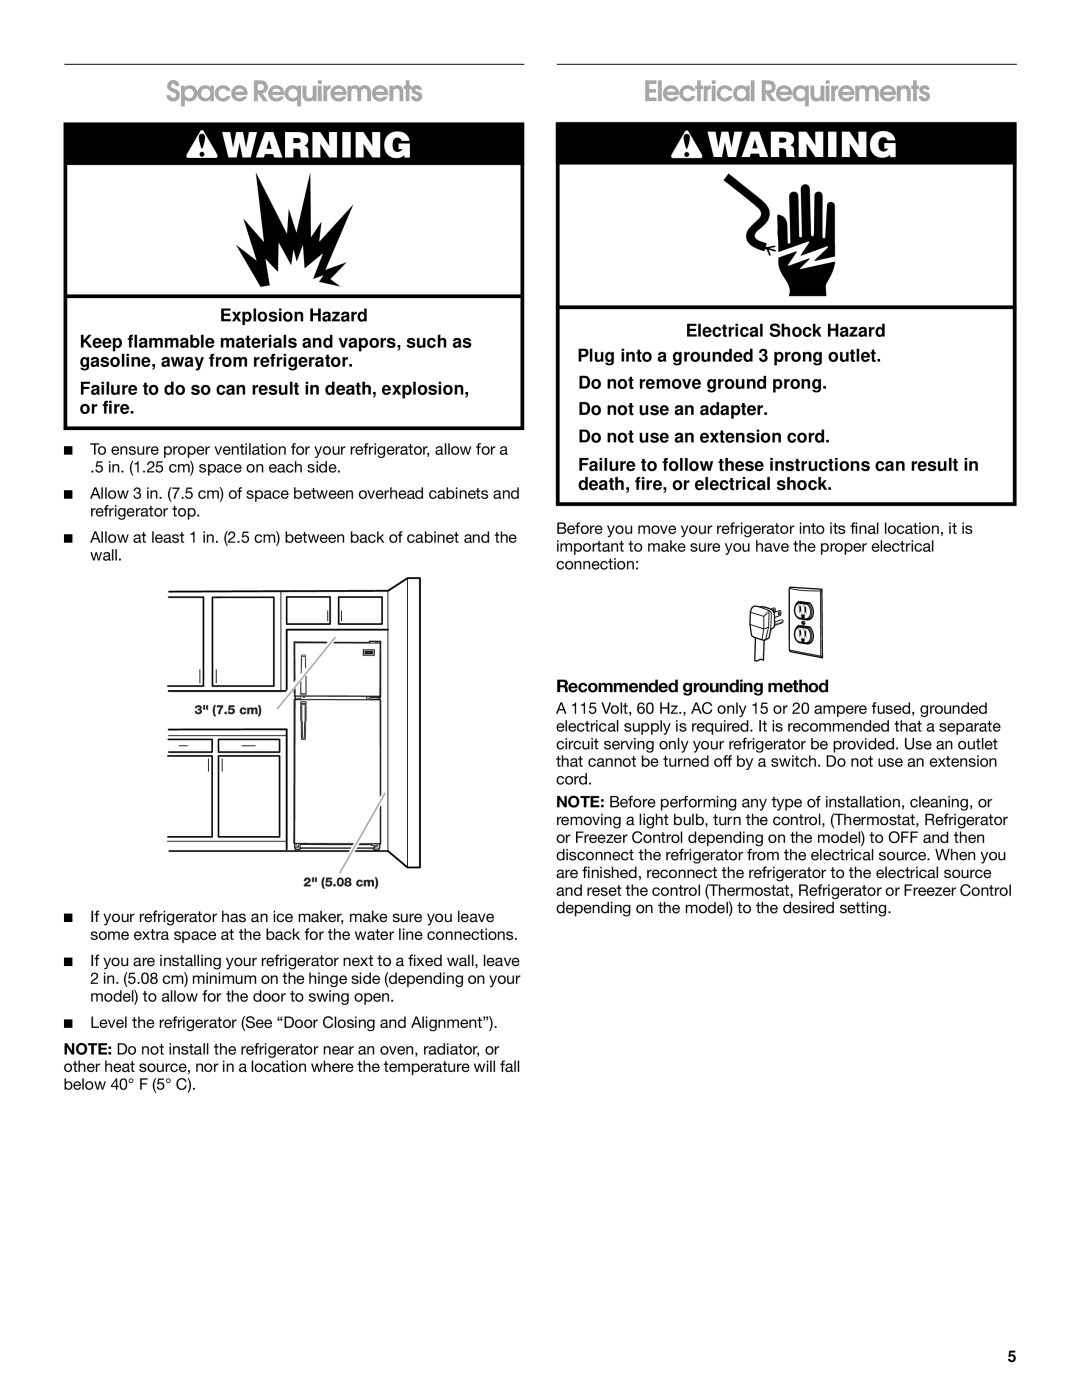 Crosley 2209920 manual Space Requirements, Electrical Requirements, Explosion Hazard, Do not use an extension cord 